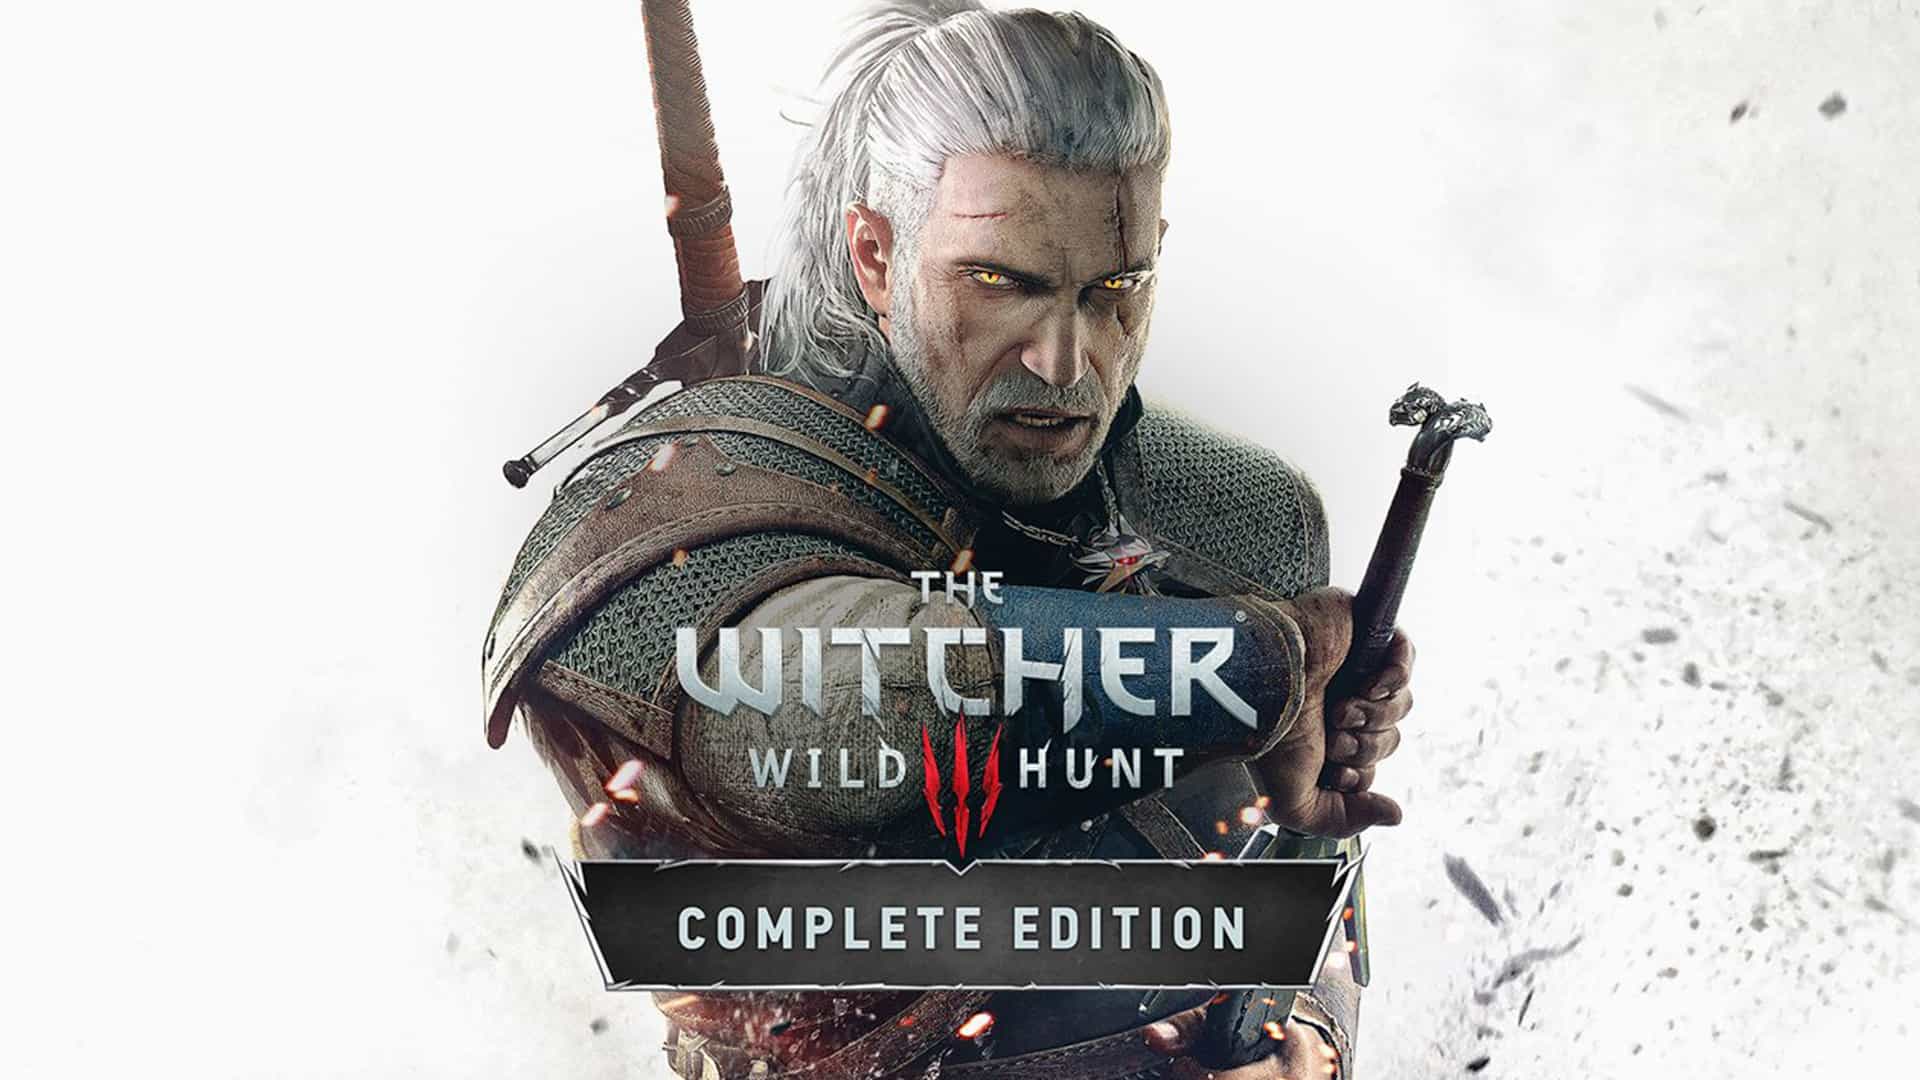 The Witcher 3: Wild Hunt – Complete Edition For Nintendo Switch Launching On October 15